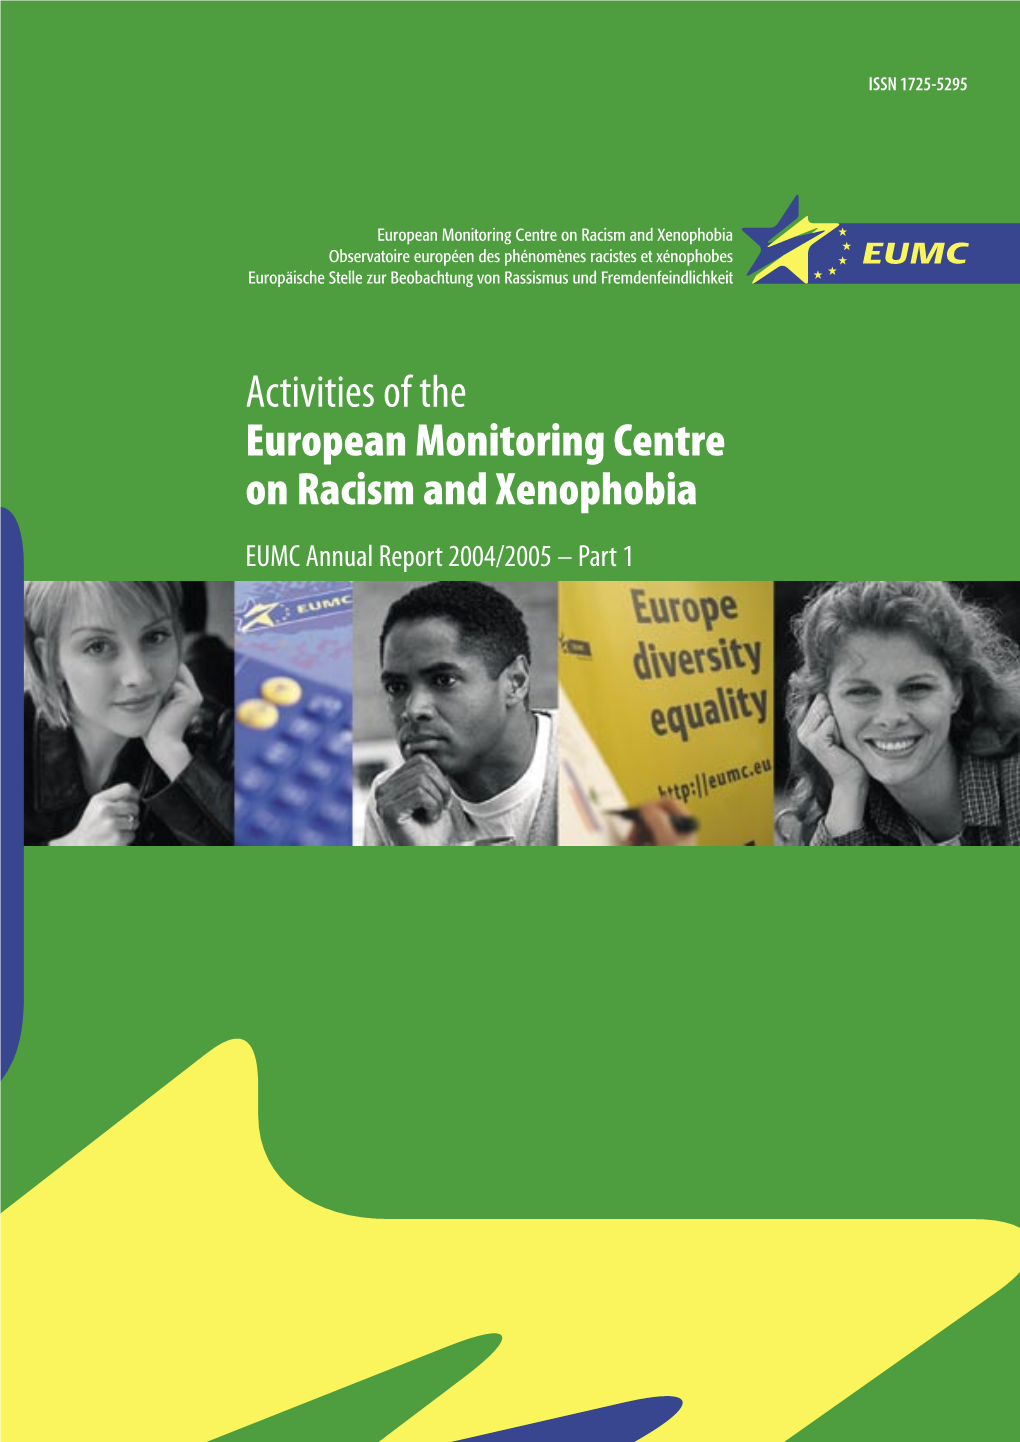 Activities of the European Monitoring Centre on Racism and Xenophobia EUMC Annual Report 2004/2005 – Part 1